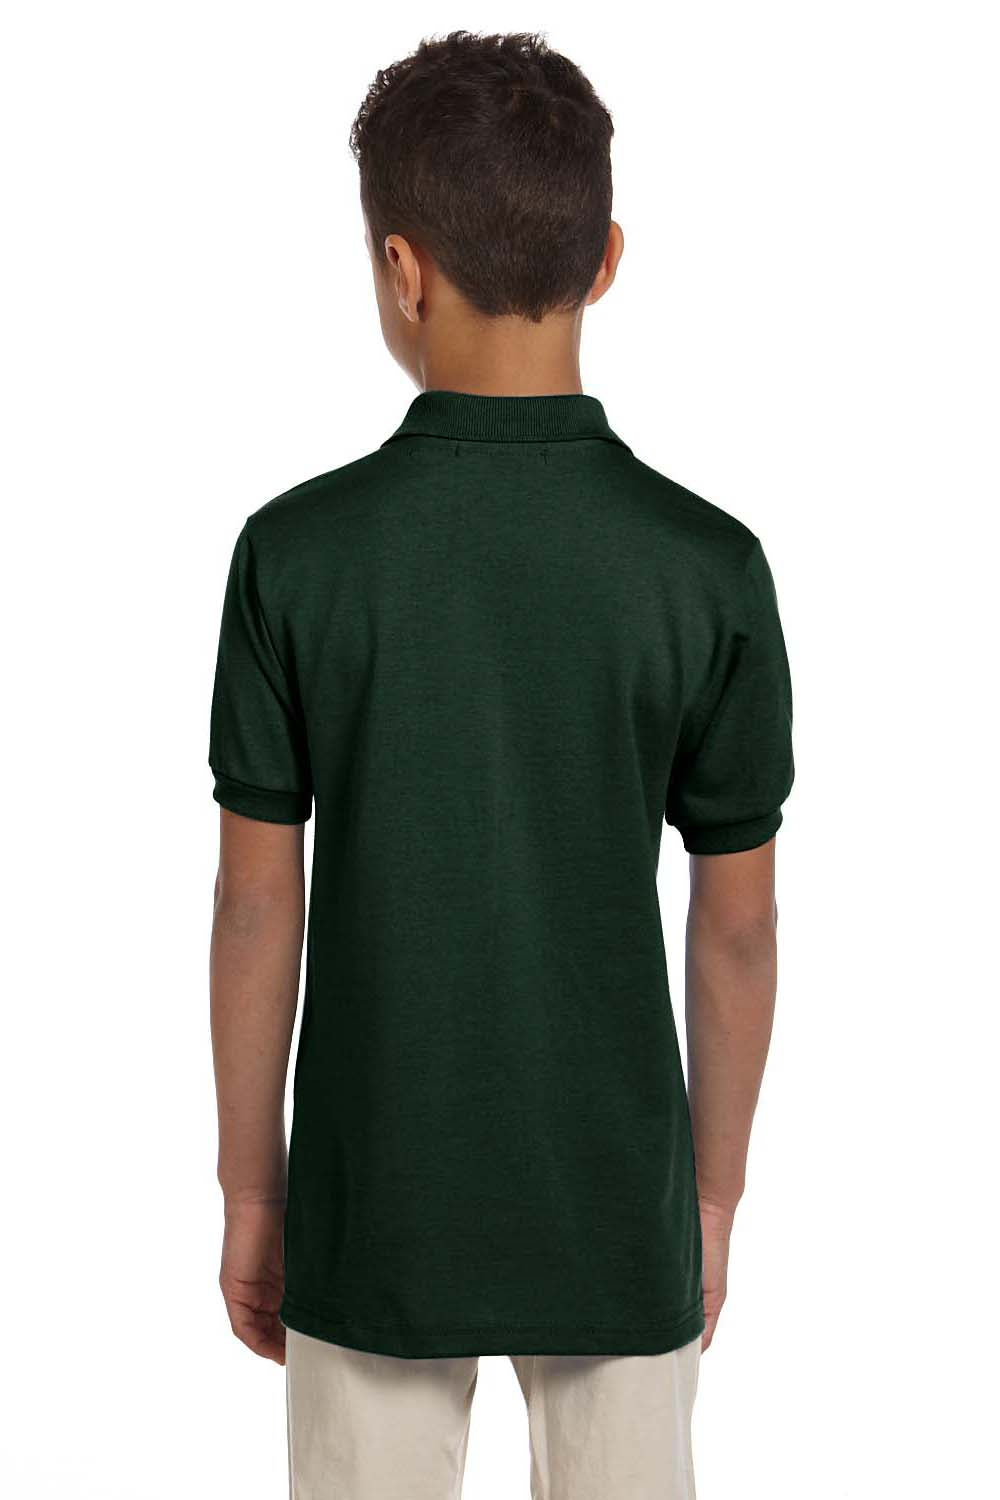 Jerzees 437Y Youth SpotShield Stain Resistant Short Sleeve Polo Shirt Forest Green Back